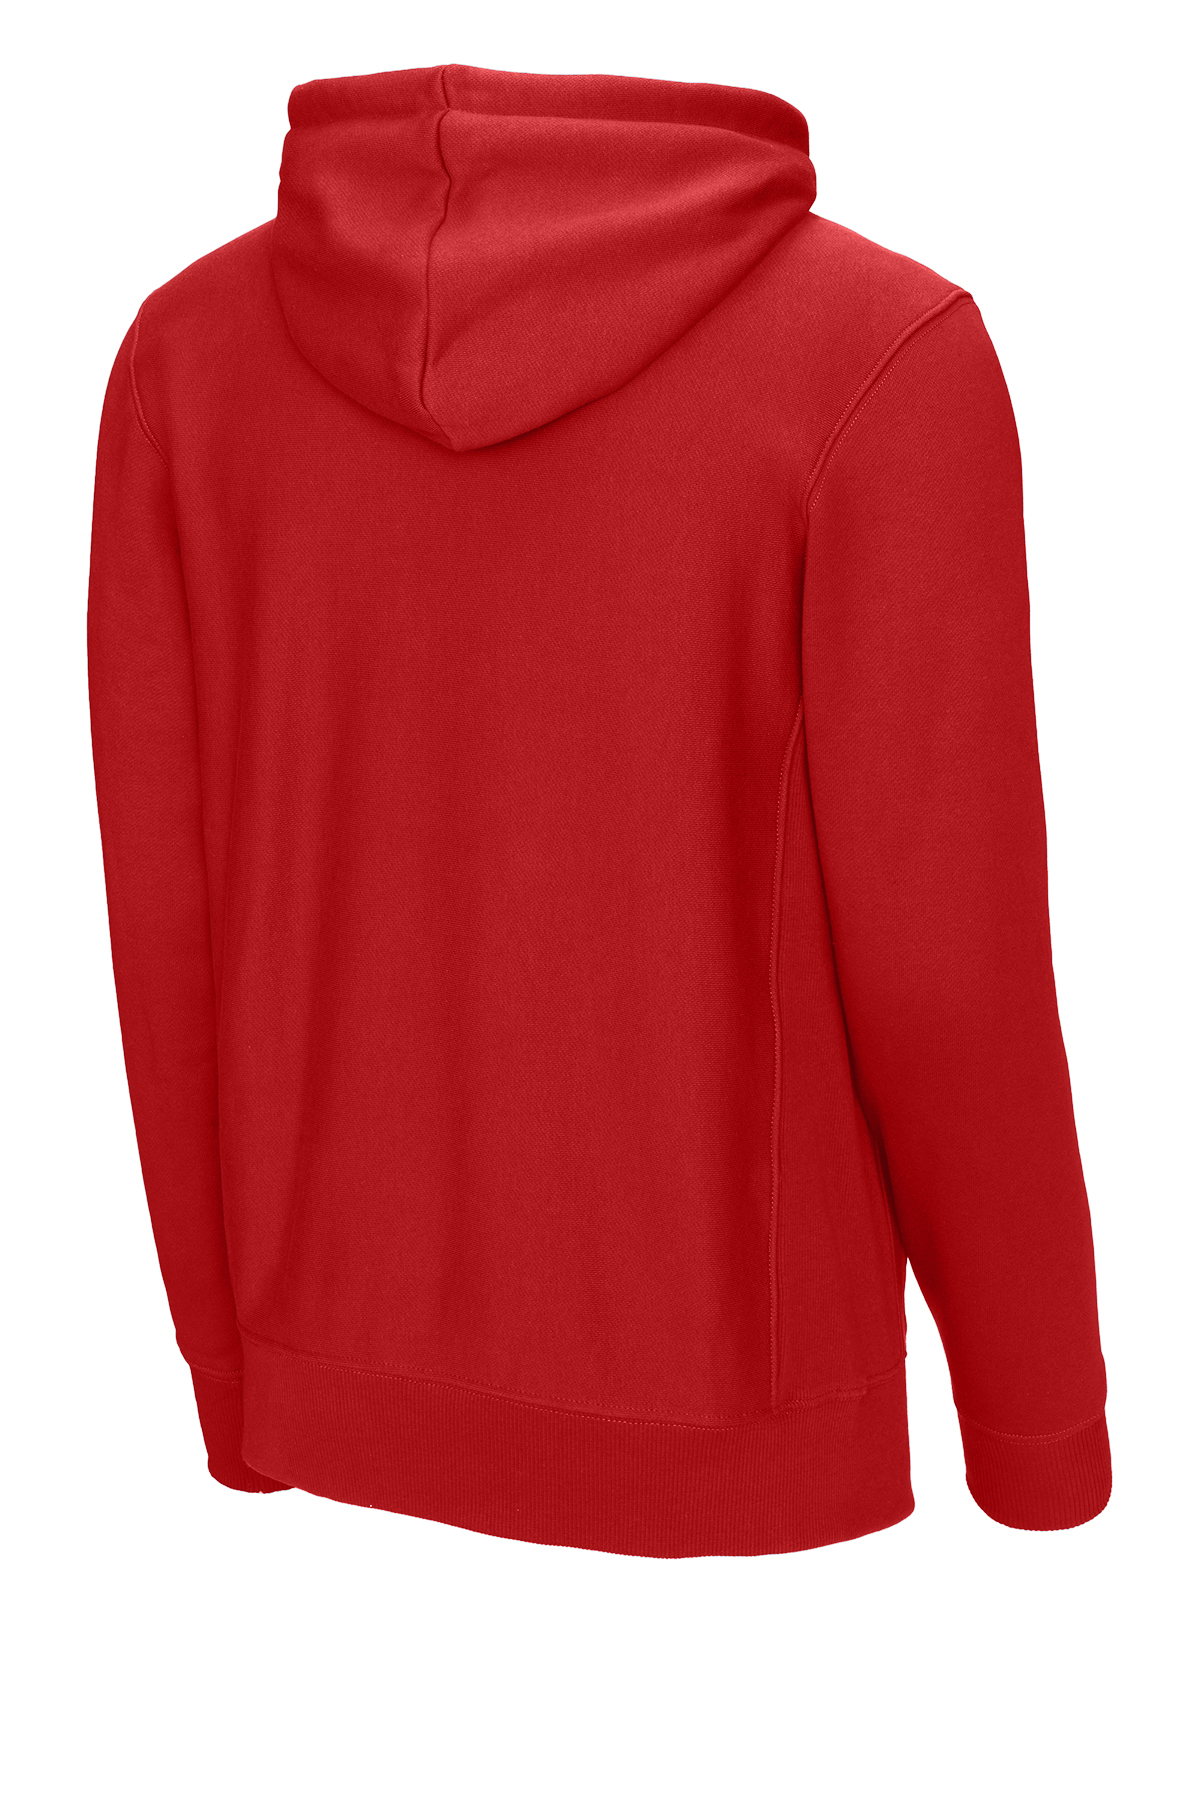 Fleece Red Women Hoodie Typography Design, Size: Large at Rs 285